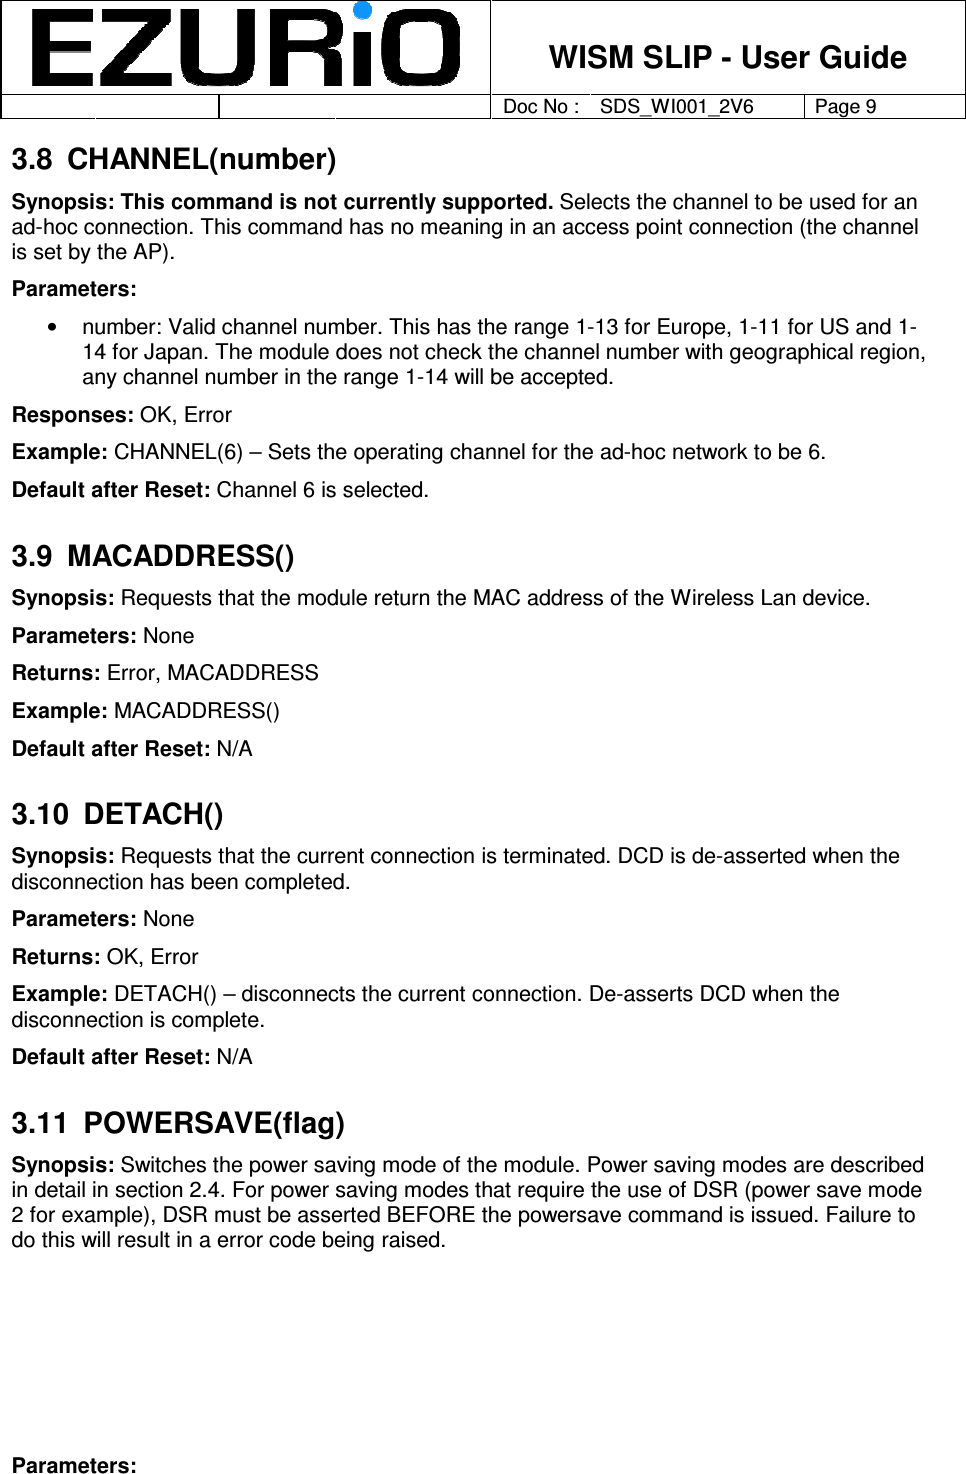    WISM SLIP - User Guide         Doc No : SDS_WI001_2V6 Page 9     3.8  CHANNEL(number) Synopsis: This command is not currently supported. Selects the channel to be used for an ad-hoc connection. This command has no meaning in an access point connection (the channel is set by the AP).  Parameters:  •  number: Valid channel number. This has the range 1-13 for Europe, 1-11 for US and 1-14 for Japan. The module does not check the channel number with geographical region, any channel number in the range 1-14 will be accepted.  Responses: OK, Error Example: CHANNEL(6) – Sets the operating channel for the ad-hoc network to be 6.  Default after Reset: Channel 6 is selected. 3.9  MACADDRESS() Synopsis: Requests that the module return the MAC address of the Wireless Lan device. Parameters: None Returns: Error, MACADDRESS Example: MACADDRESS() Default after Reset: N/A 3.10  DETACH() Synopsis: Requests that the current connection is terminated. DCD is de-asserted when the disconnection has been completed.   Parameters: None Returns: OK, Error Example: DETACH() – disconnects the current connection. De-asserts DCD when the disconnection is complete. Default after Reset: N/A 3.11  POWERSAVE(flag)  Synopsis: Switches the power saving mode of the module. Power saving modes are described in detail in section 2.4. For power saving modes that require the use of DSR (power save mode 2 for example), DSR must be asserted BEFORE the powersave command is issued. Failure to do this will result in a error code being raised.       Parameters:  